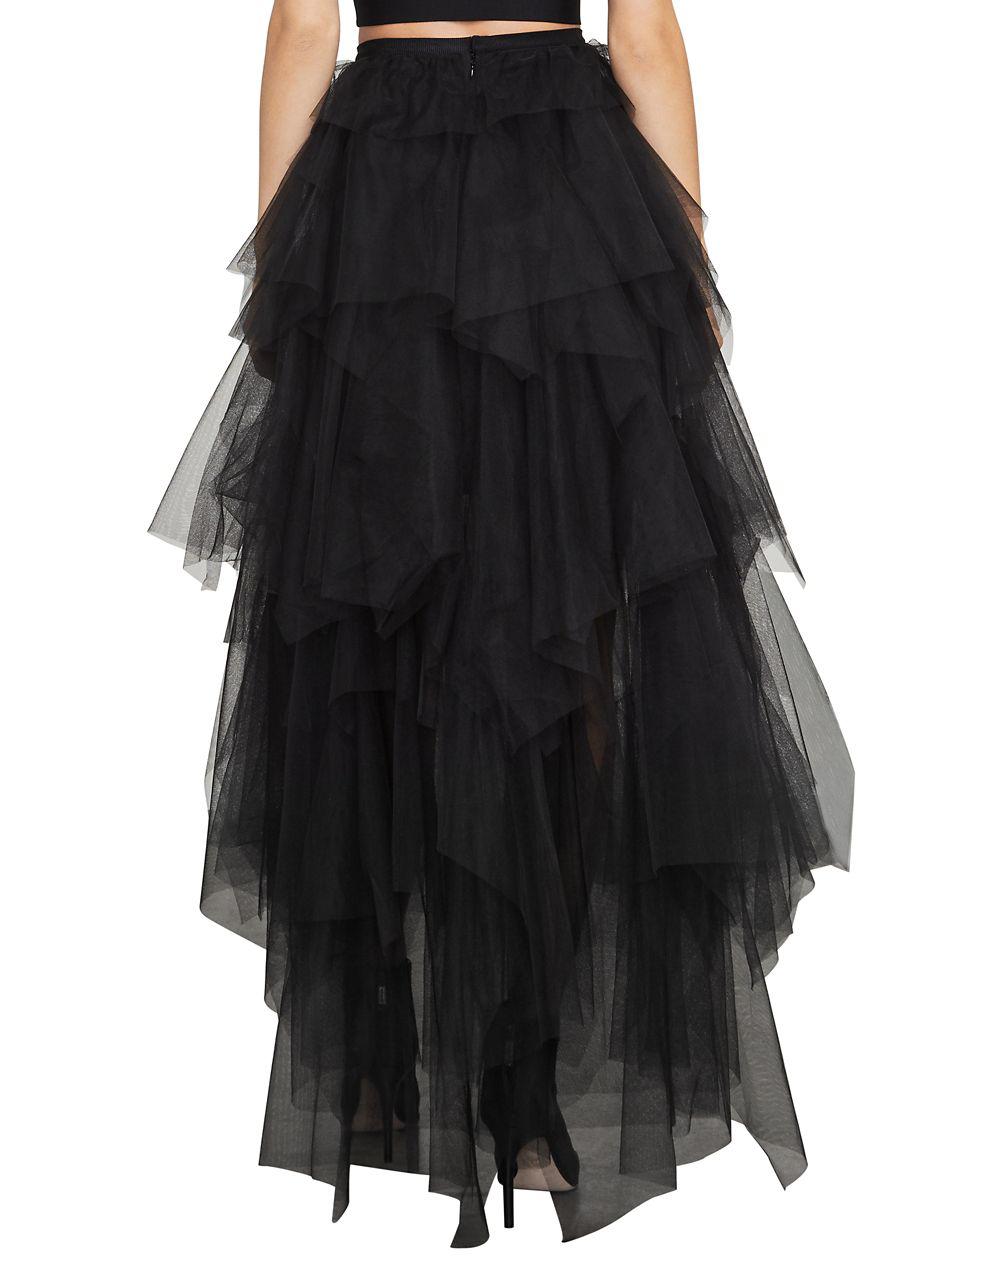 BCBGMAXAZRIA Camber Layered Tulle Maxi Skirt in Black - Lyst